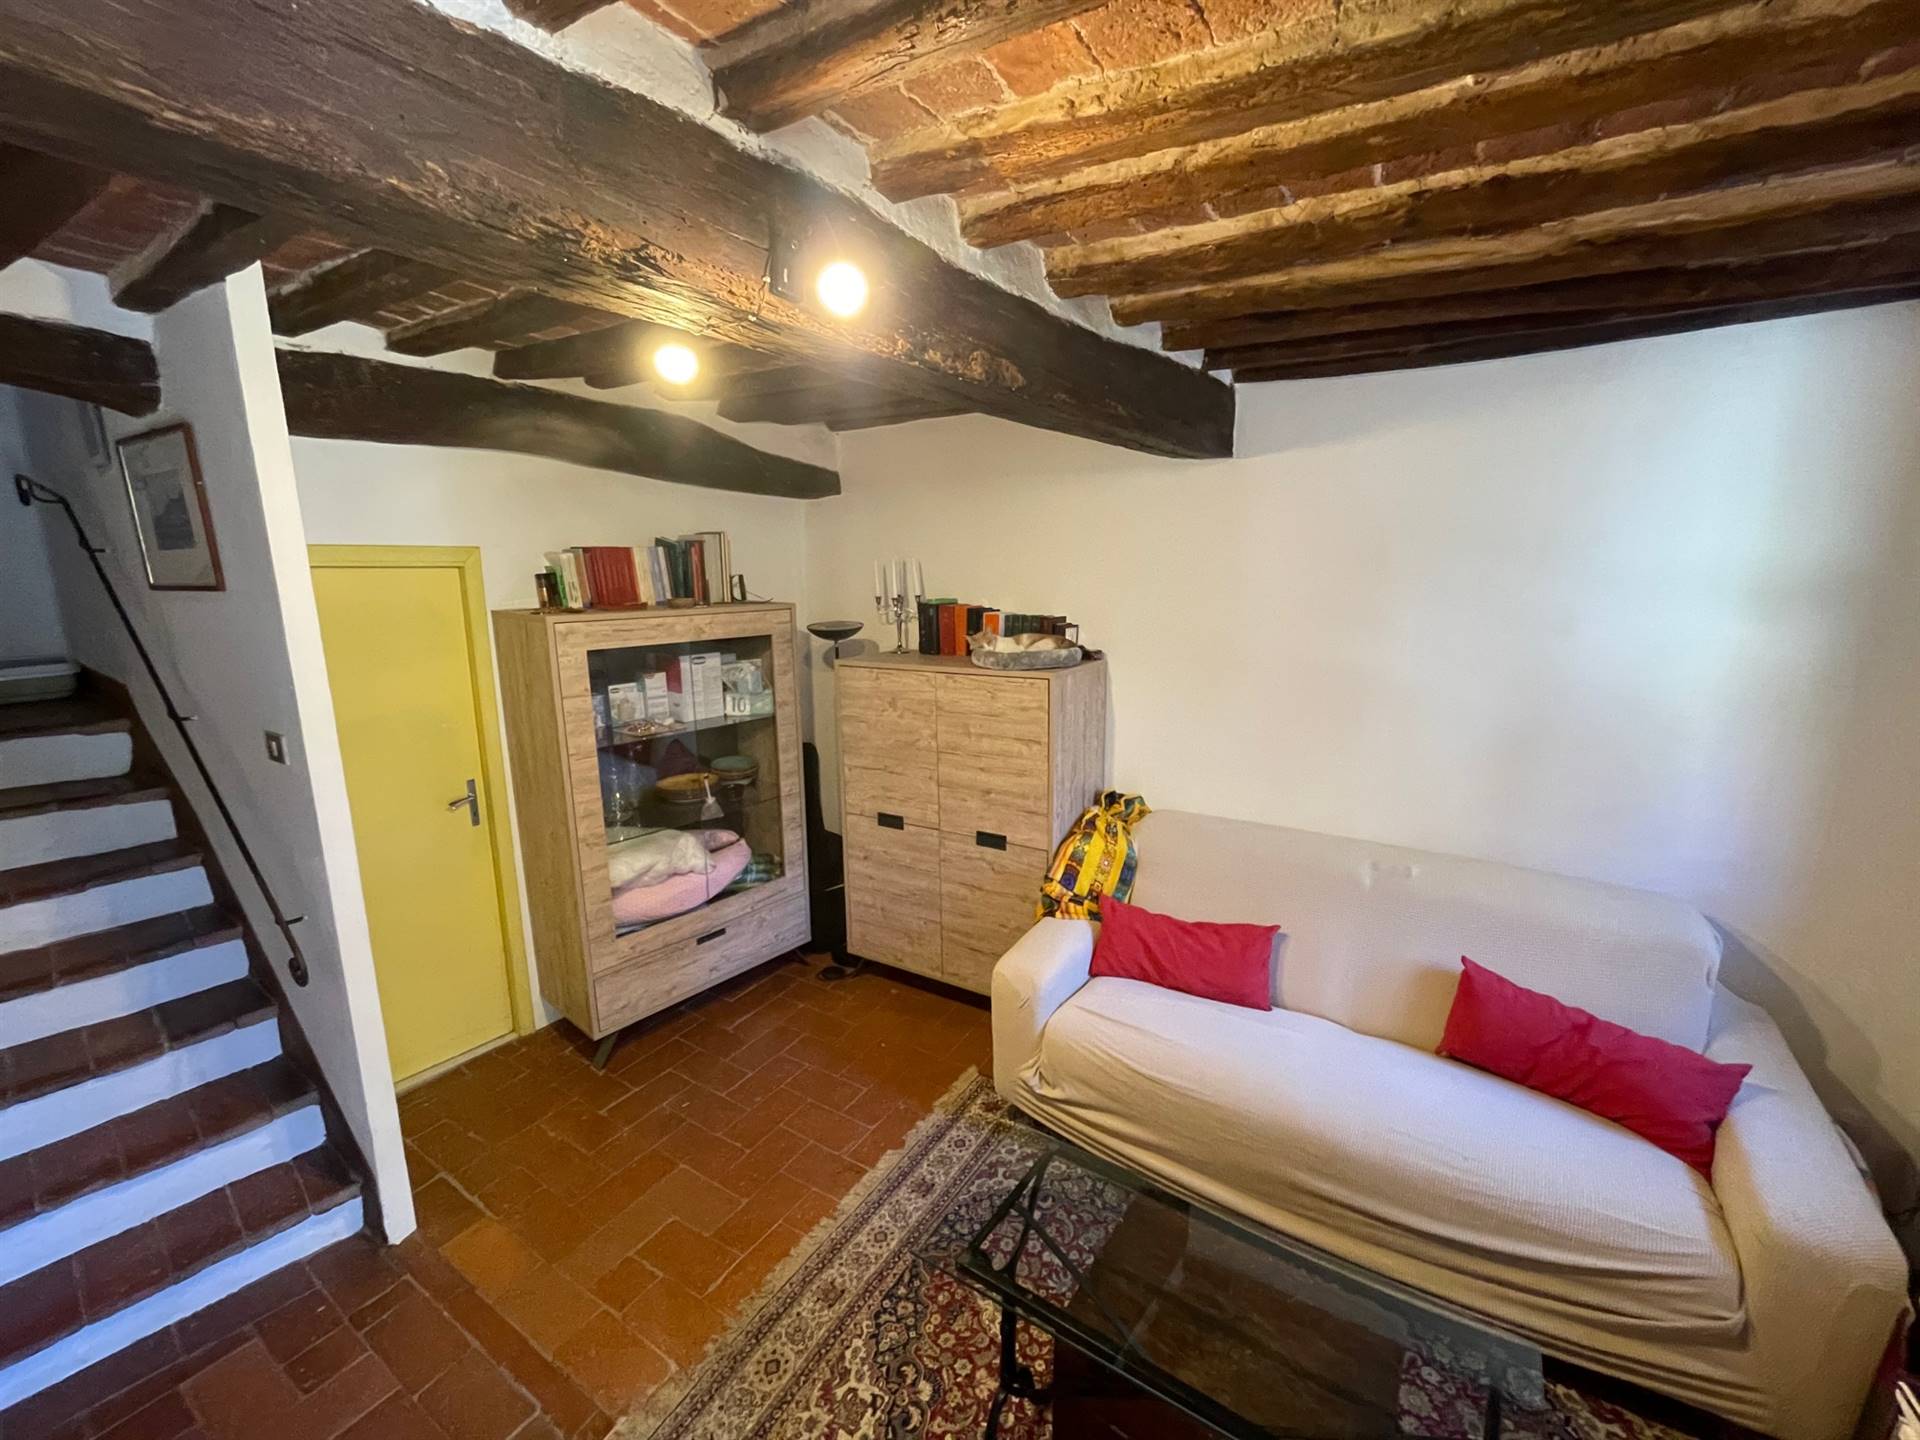 Self-catering apartments TOSCANA Siena